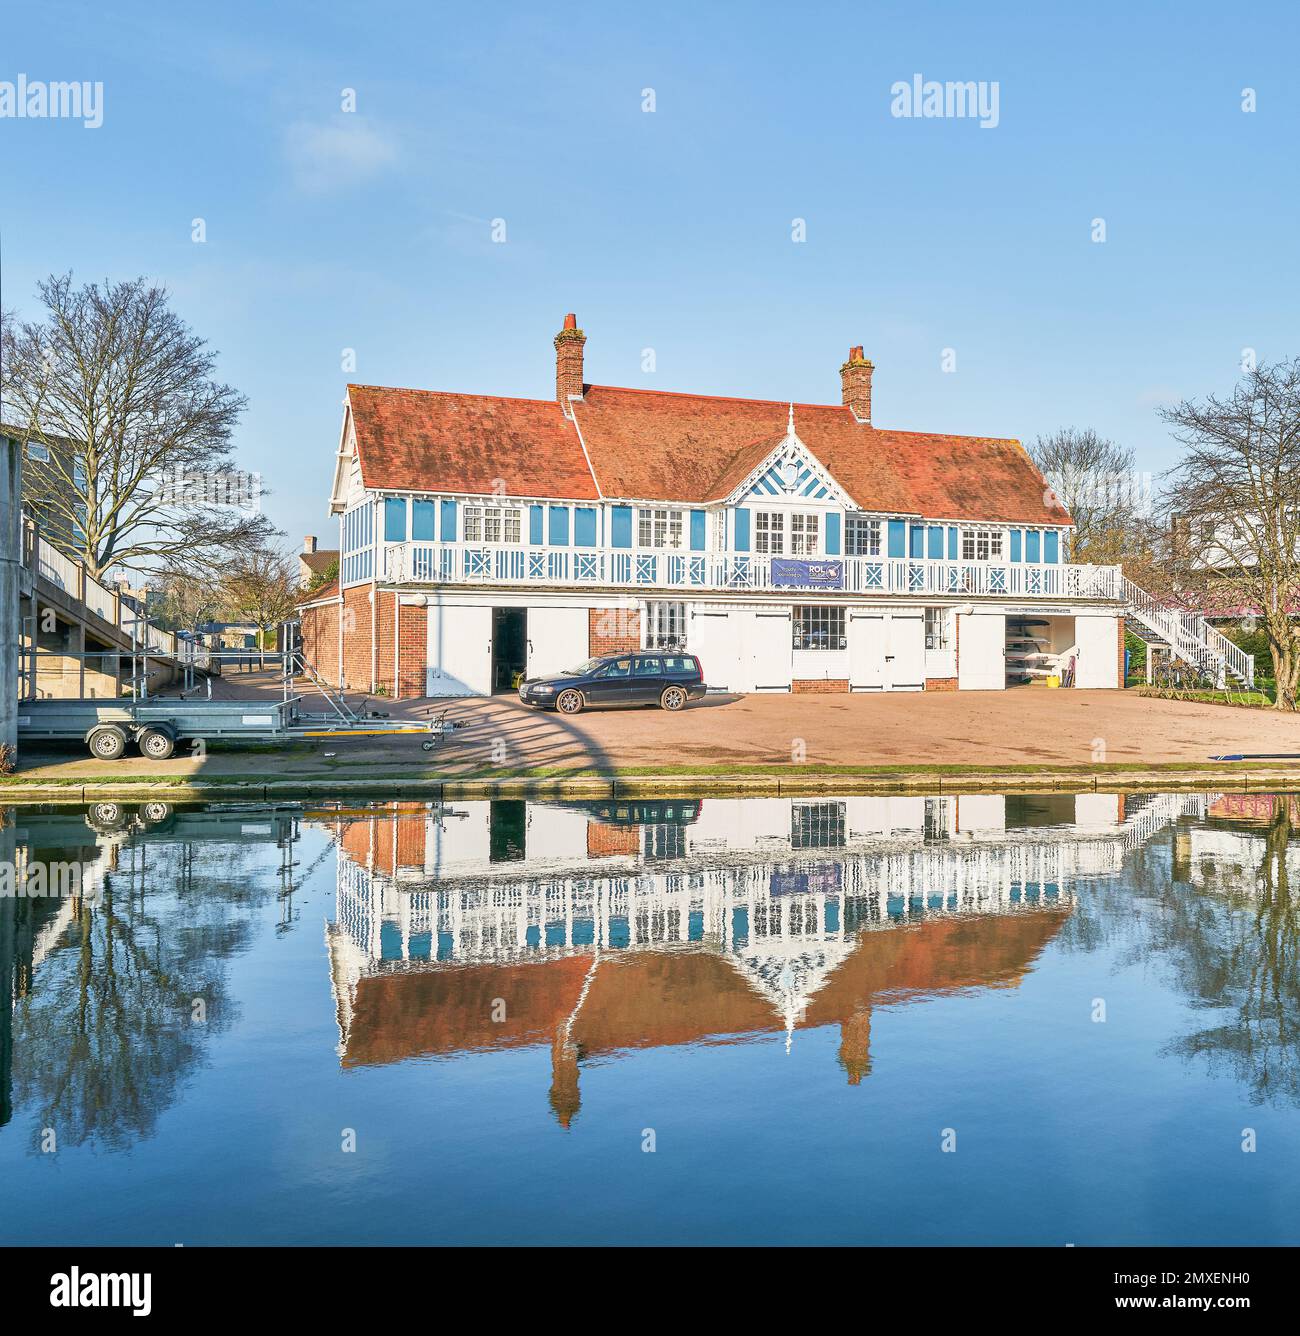 University of Cambridge, Emmanuel college, boat club house at a bank of the river Cam, Cambridge, England, on a sunny winter day. Stock Photo